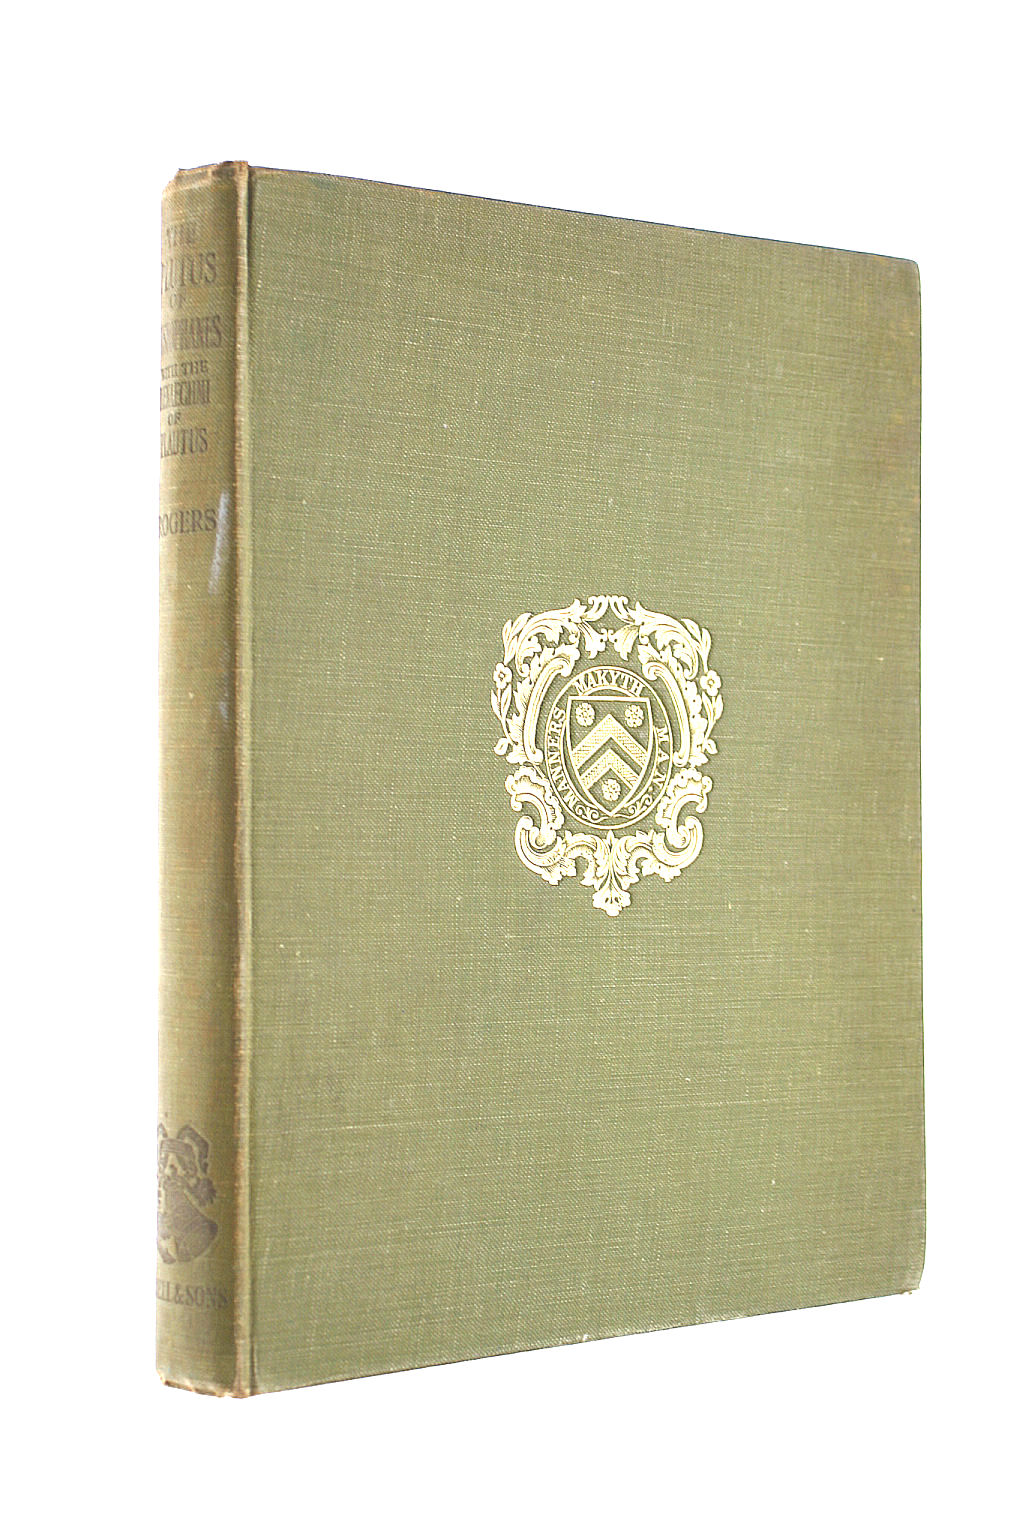 ARISTOPHANES, BY B. BICKLEY ROGERS (TRANSL) - The Comedies of Aristophanes: Vol. VI: XI. The Plutus